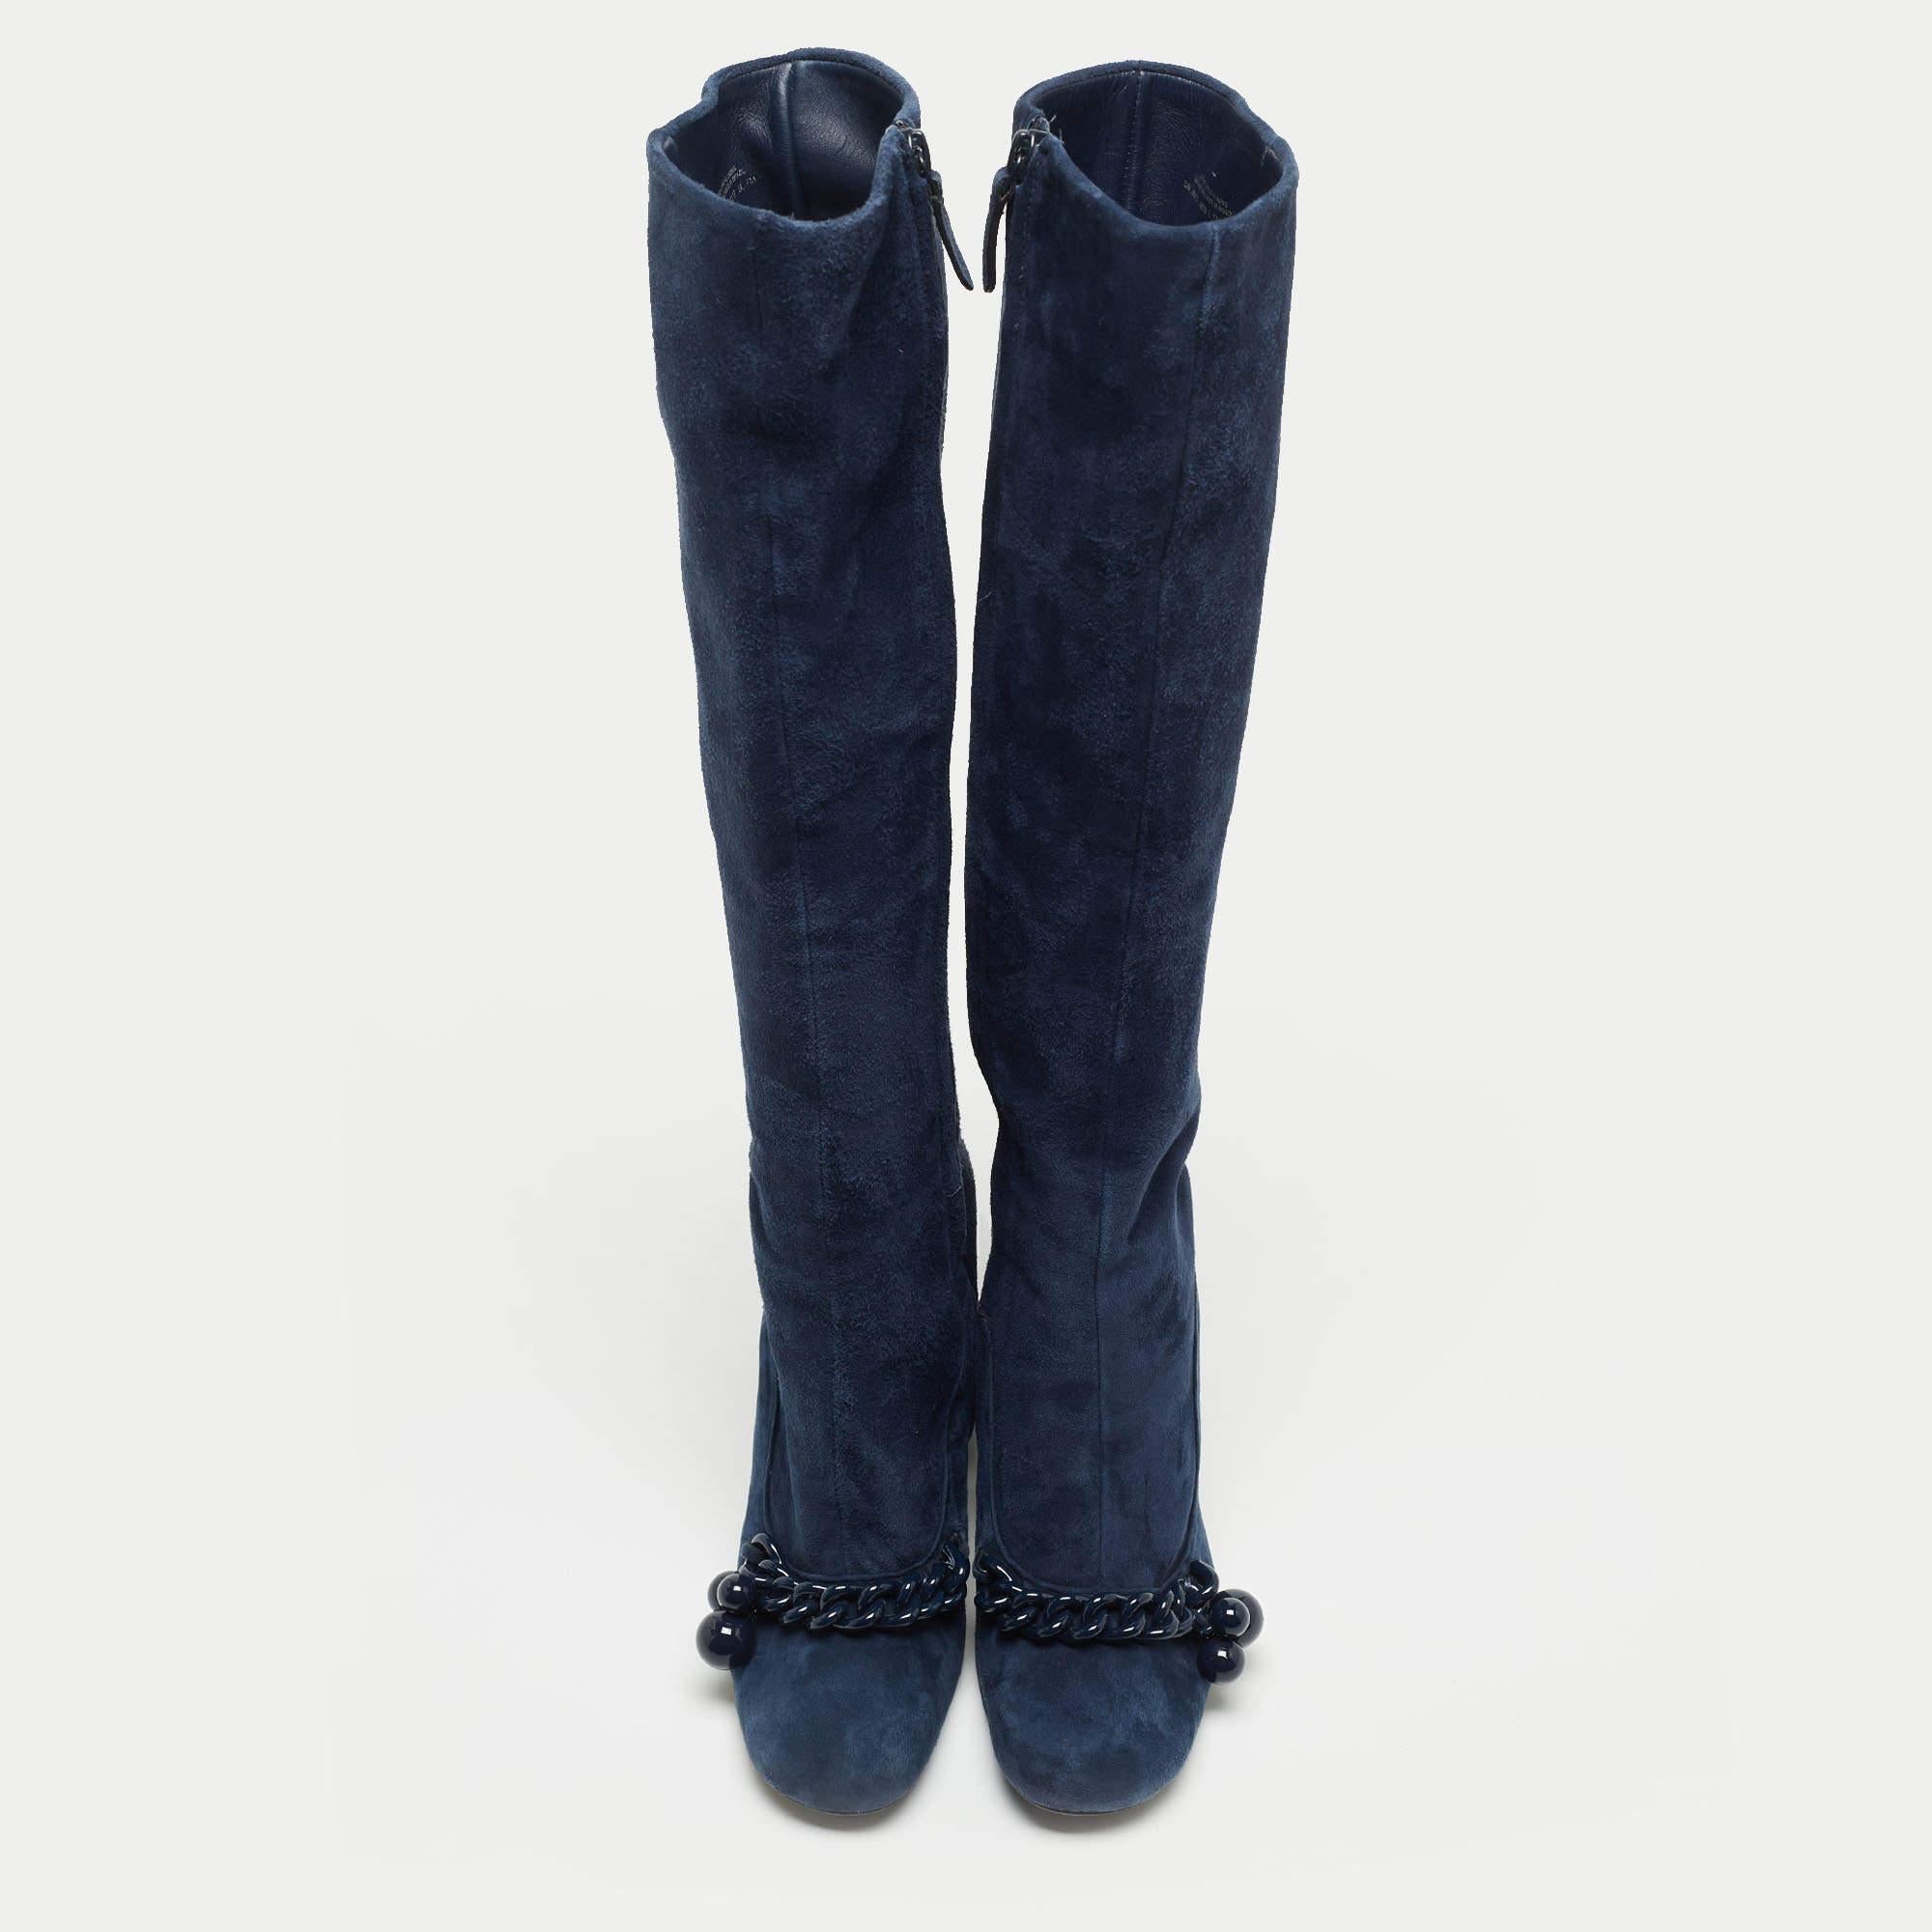 Nail a confident look with these designer knee-length boots from Tory Burch! They're made of suede and added with chain details and block heels.

